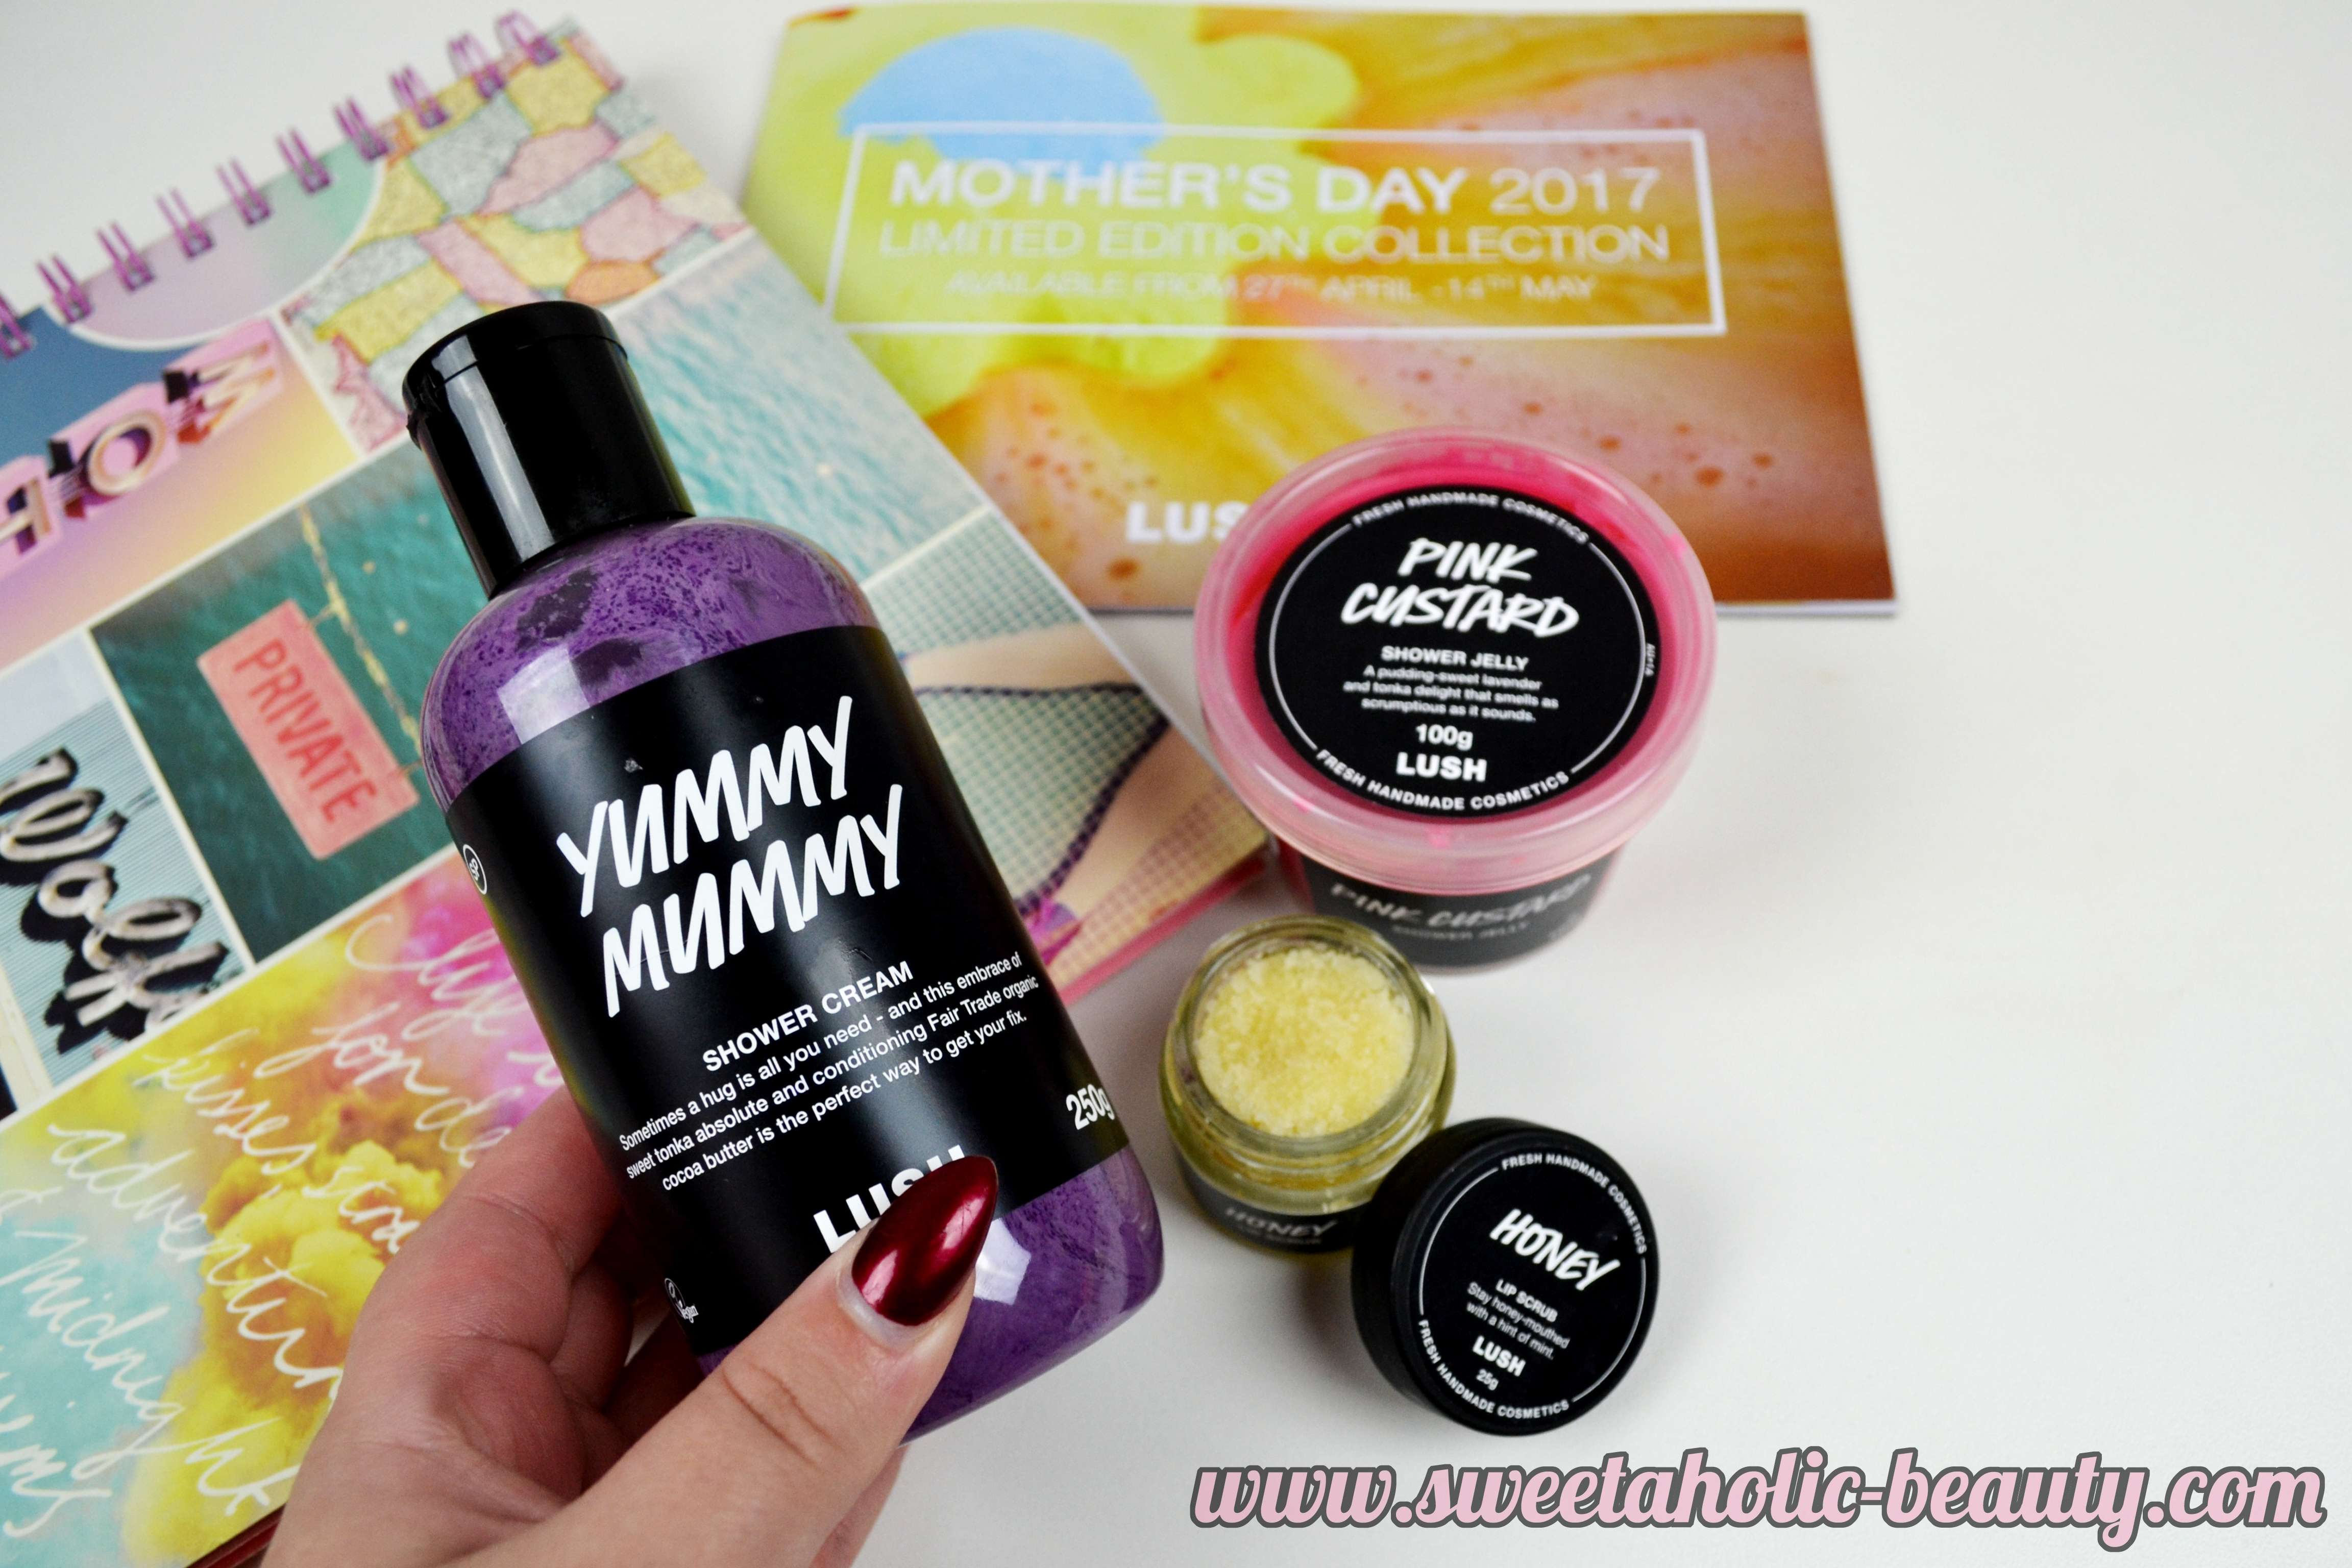 Lush Cosmetics Mother's Day Collection - Sweetaholic Beauty